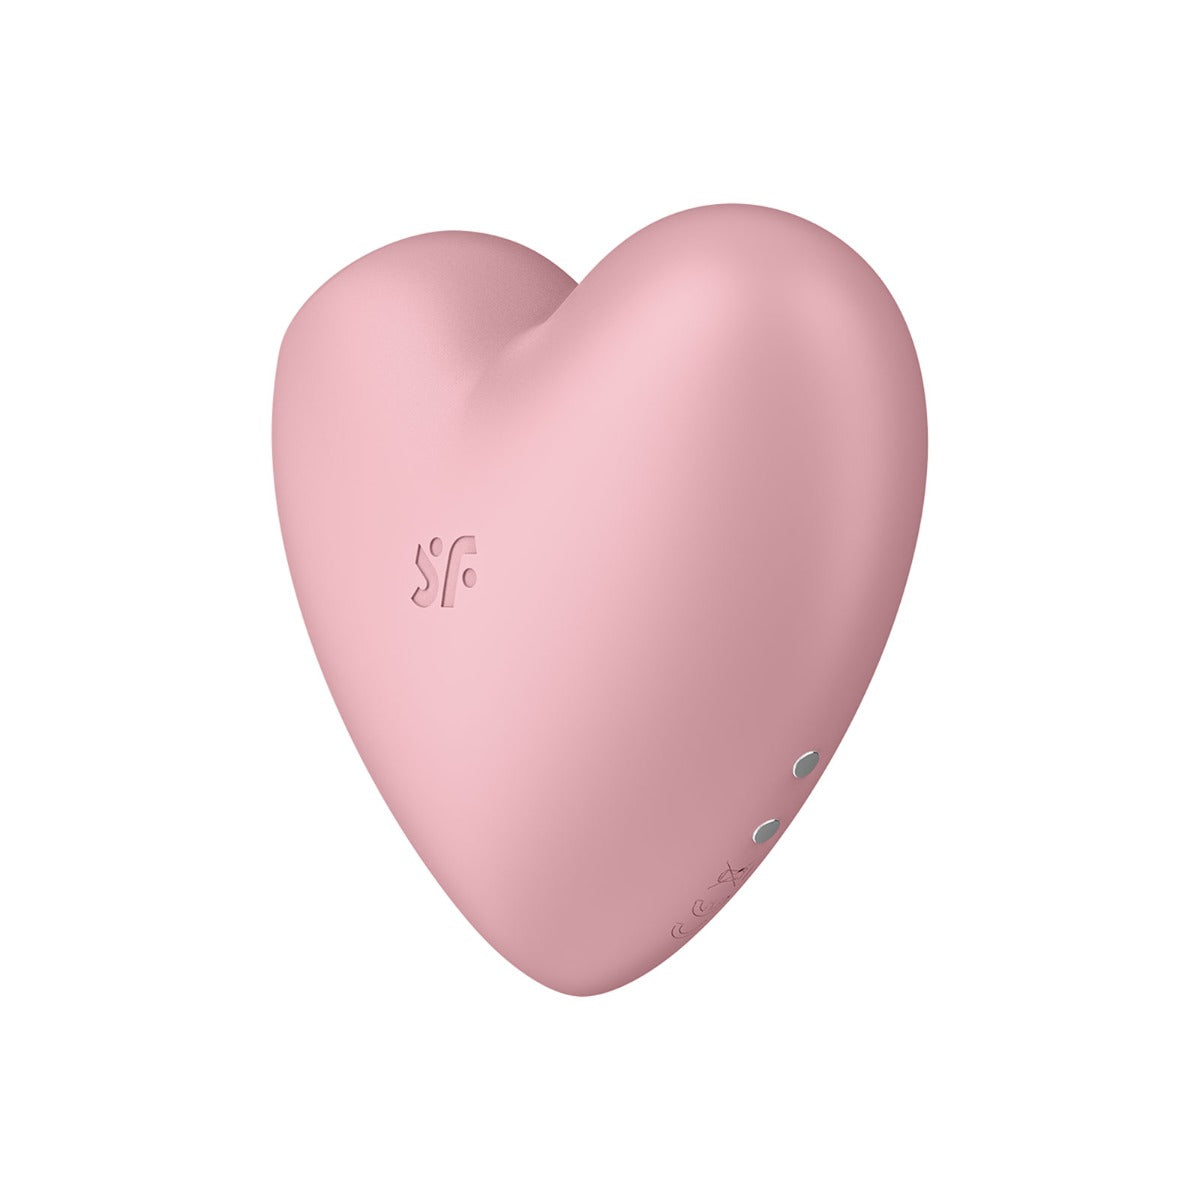 Satisfyer | Cutie Heart Double Air Pulse Vibrator - Light Red